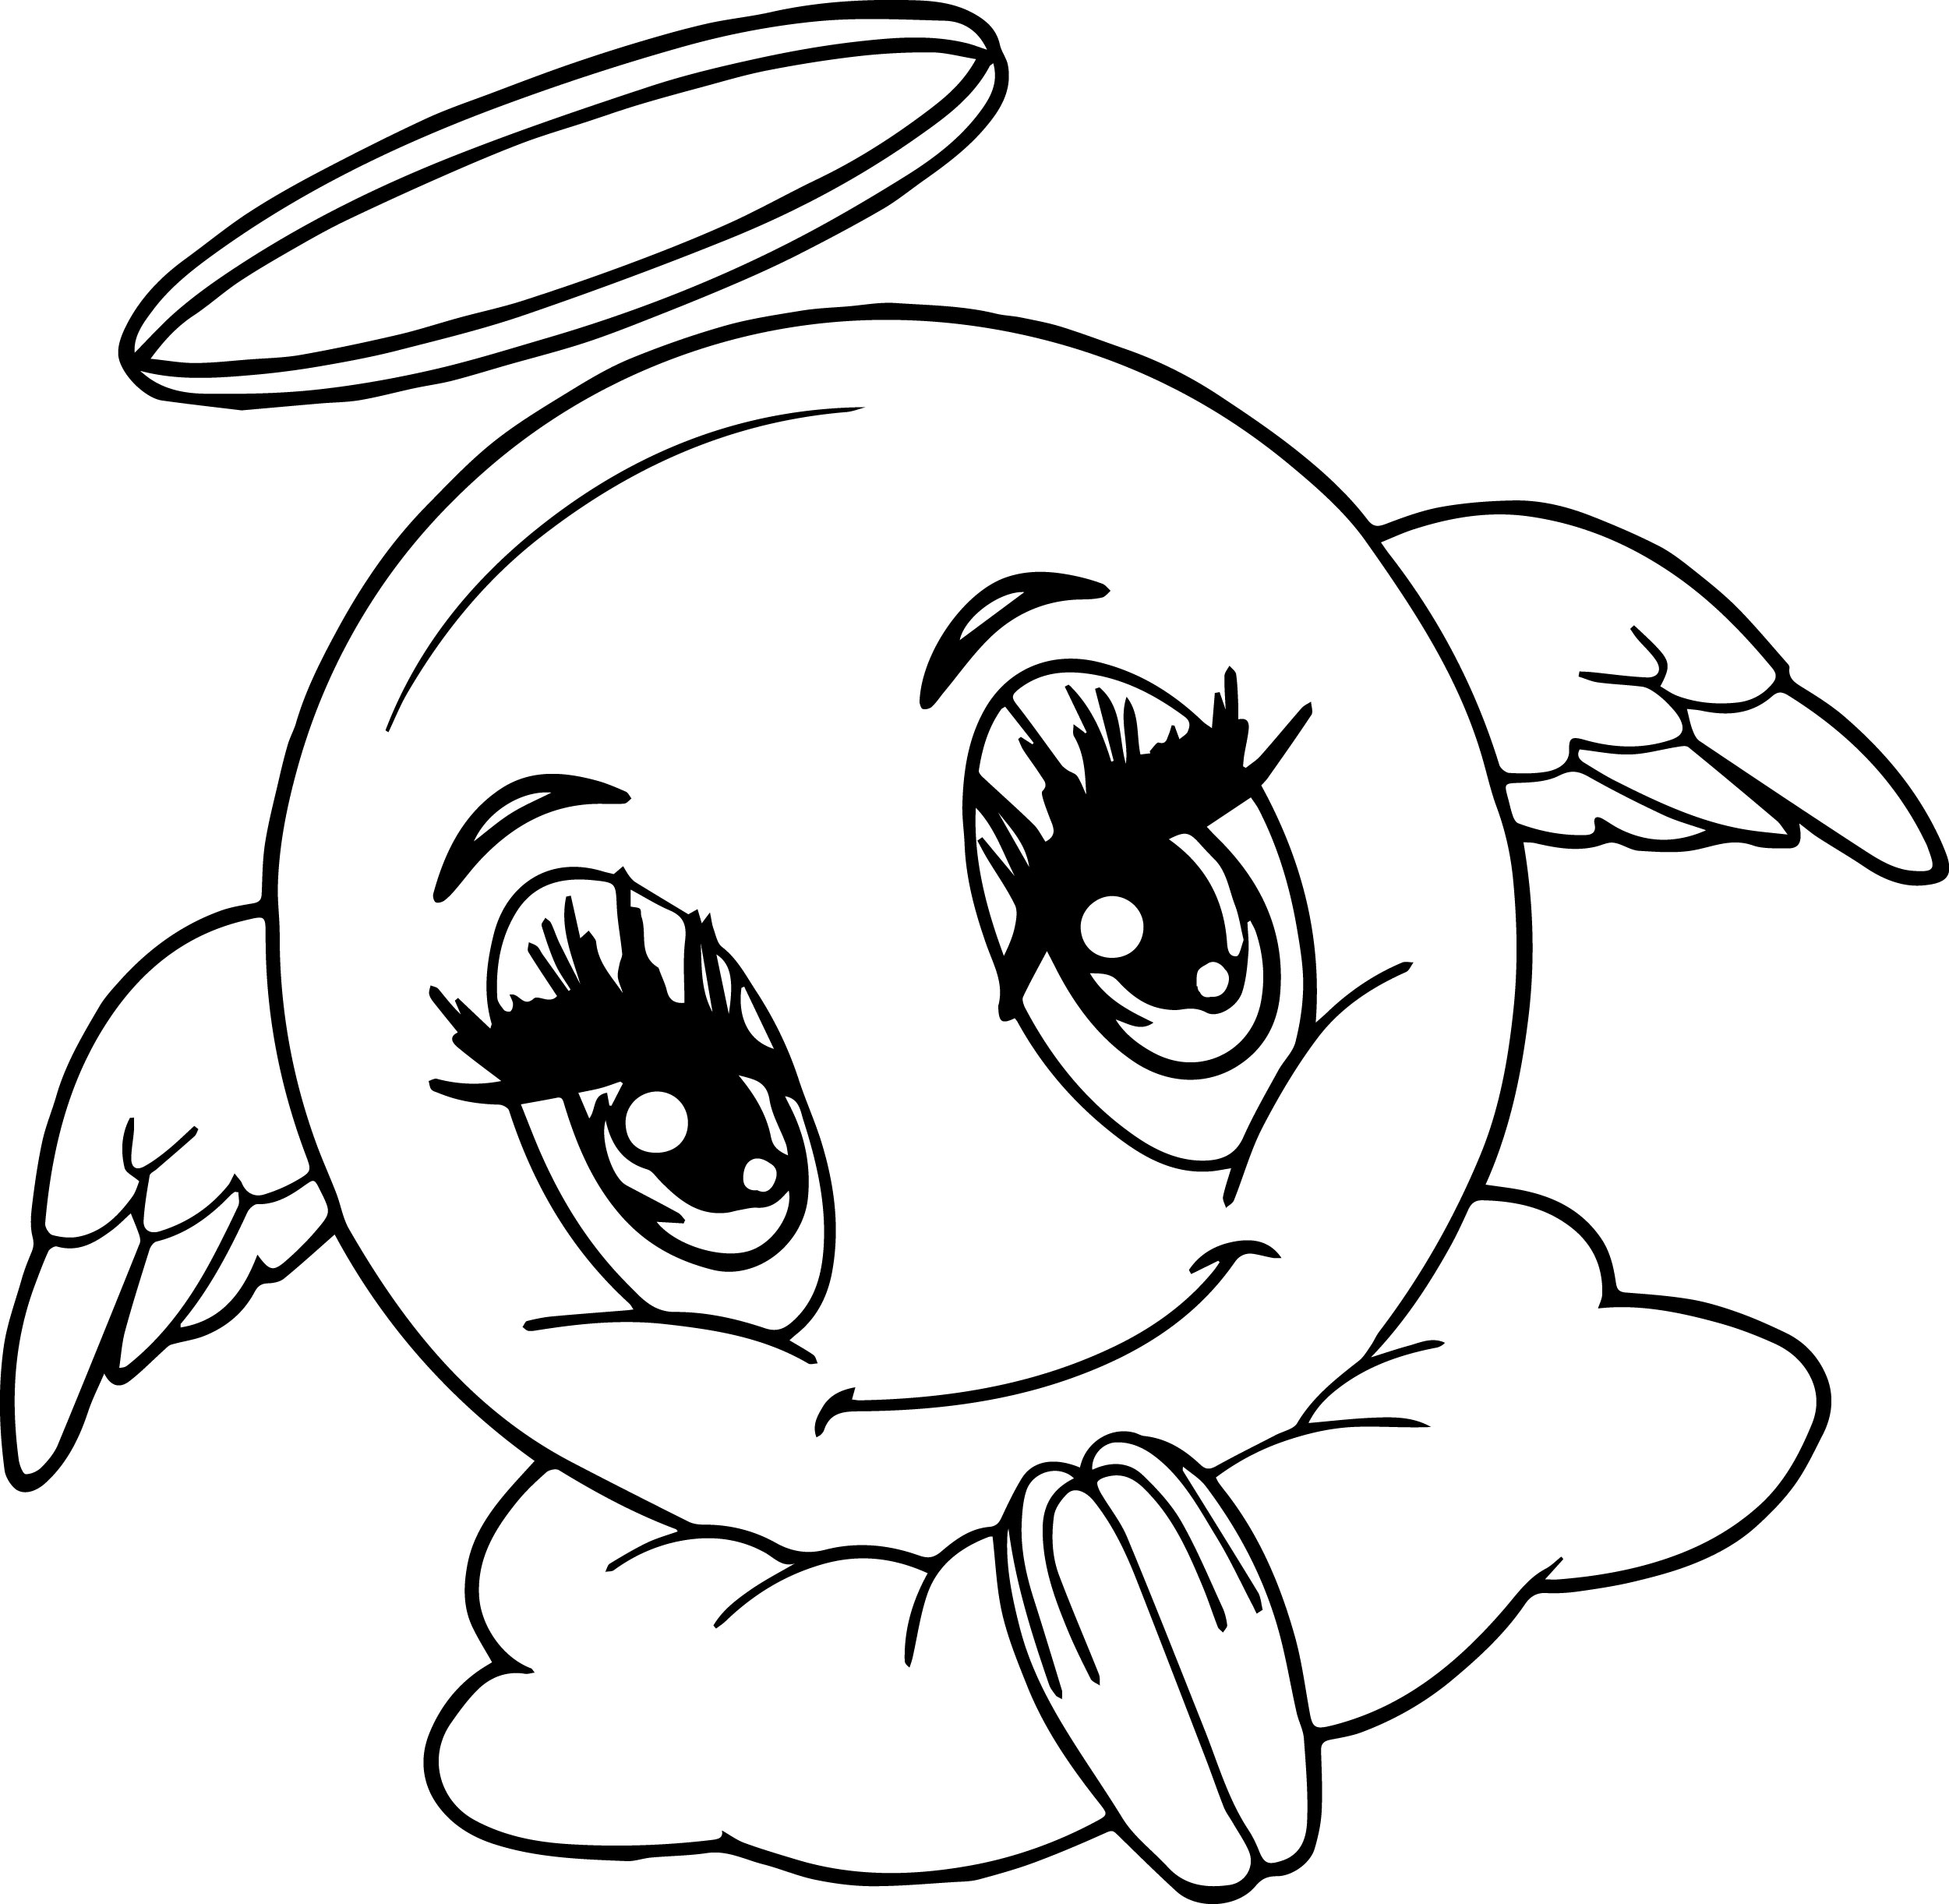 Emoji Coloring Pages Best Coloring Pages For Kids Coloring Wallpapers Download Free Images Wallpaper [coloring436.blogspot.com]